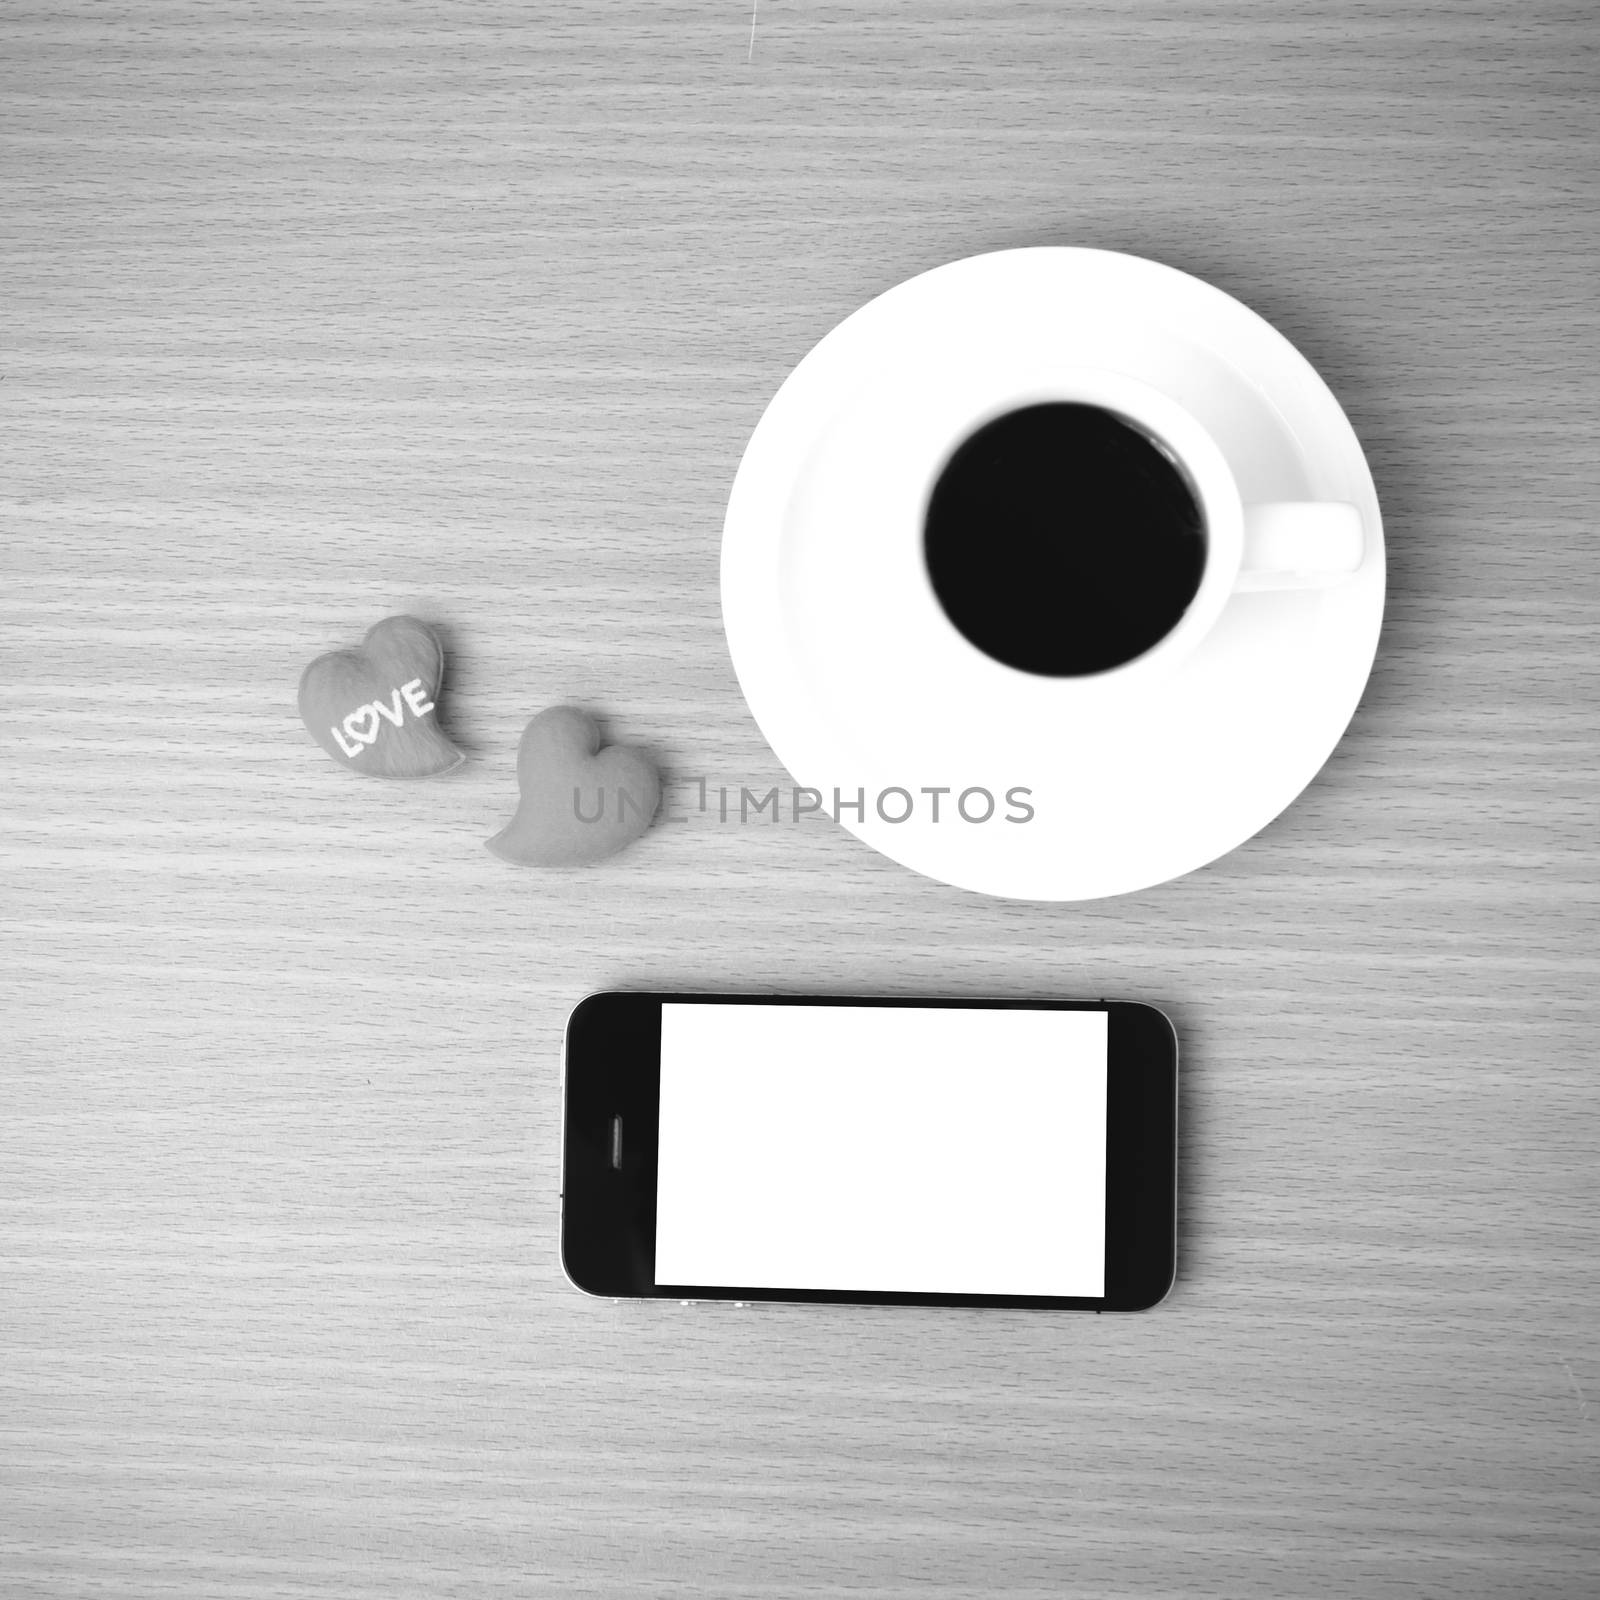 coffee cup and phone and heart on wood background black and white color